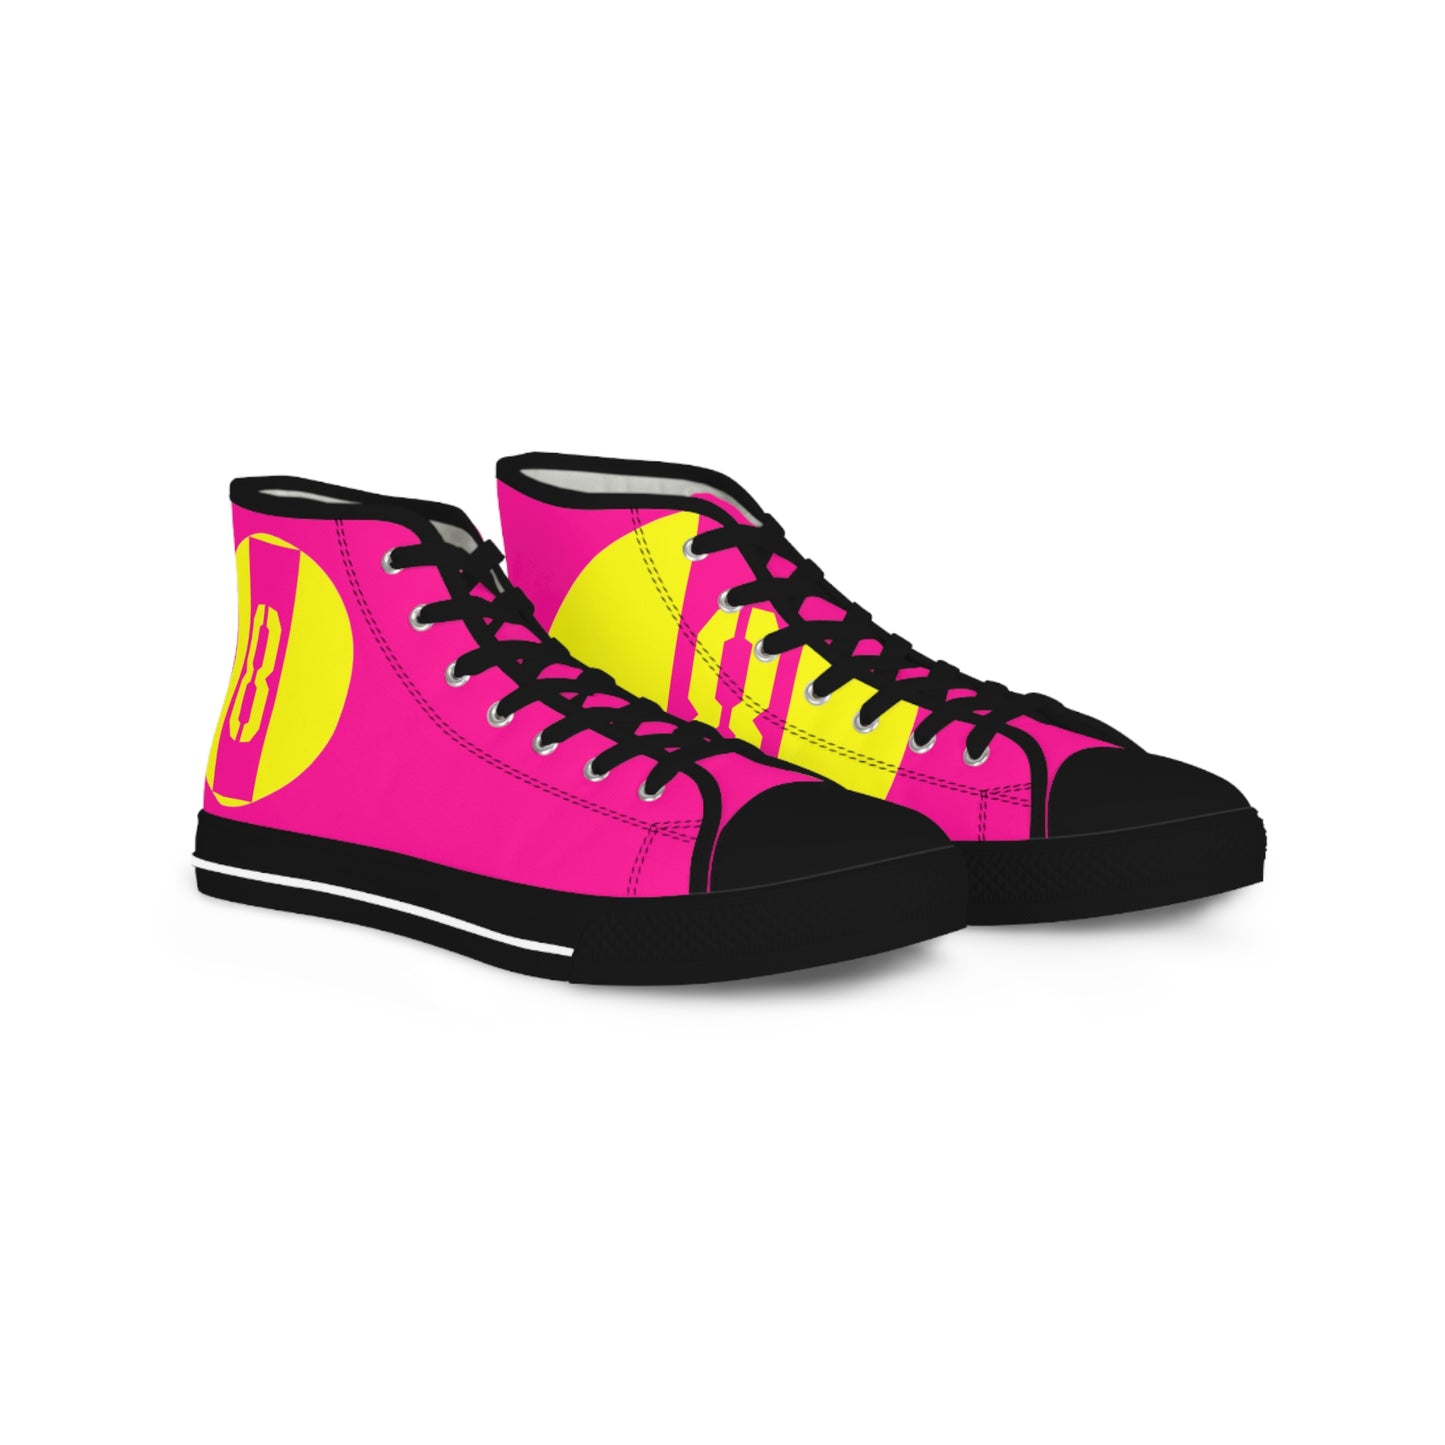 Limited Edition High Top Sneakers - 8 - Pink